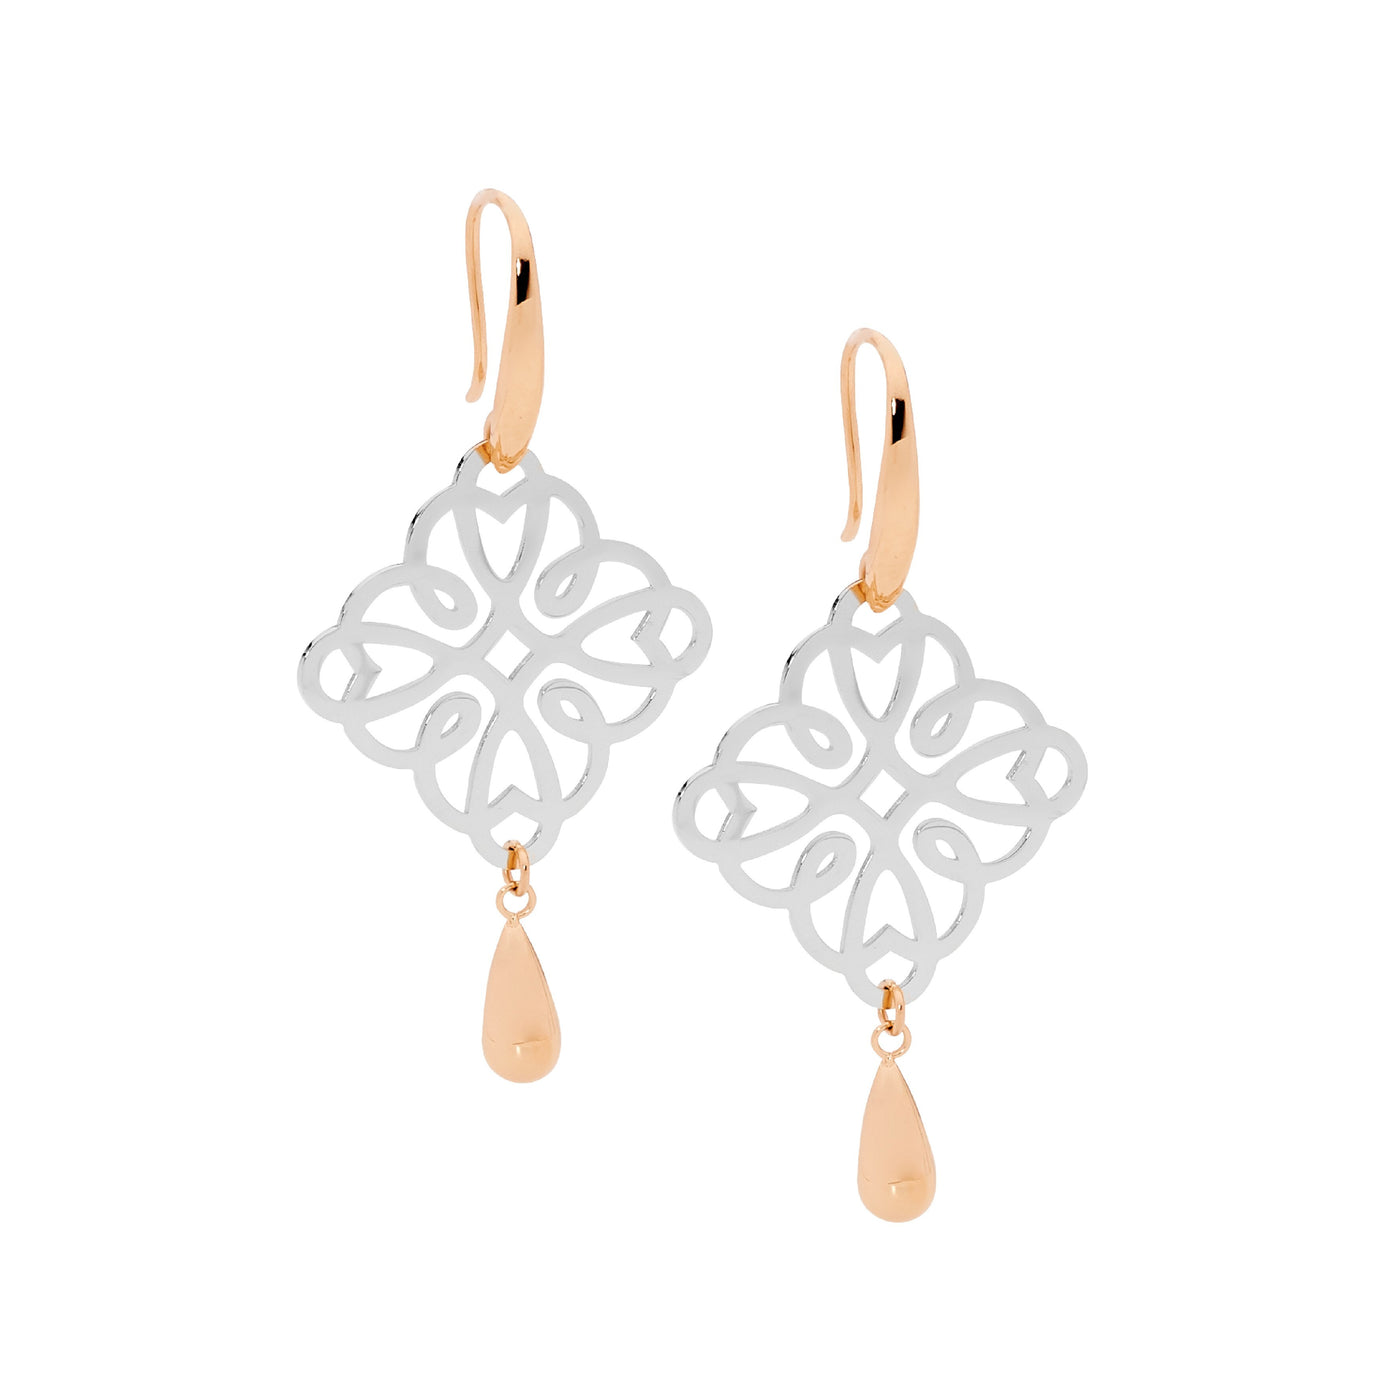 Stainless steel filigree square earrings with drop tear, 2 tone rose gold IP plating